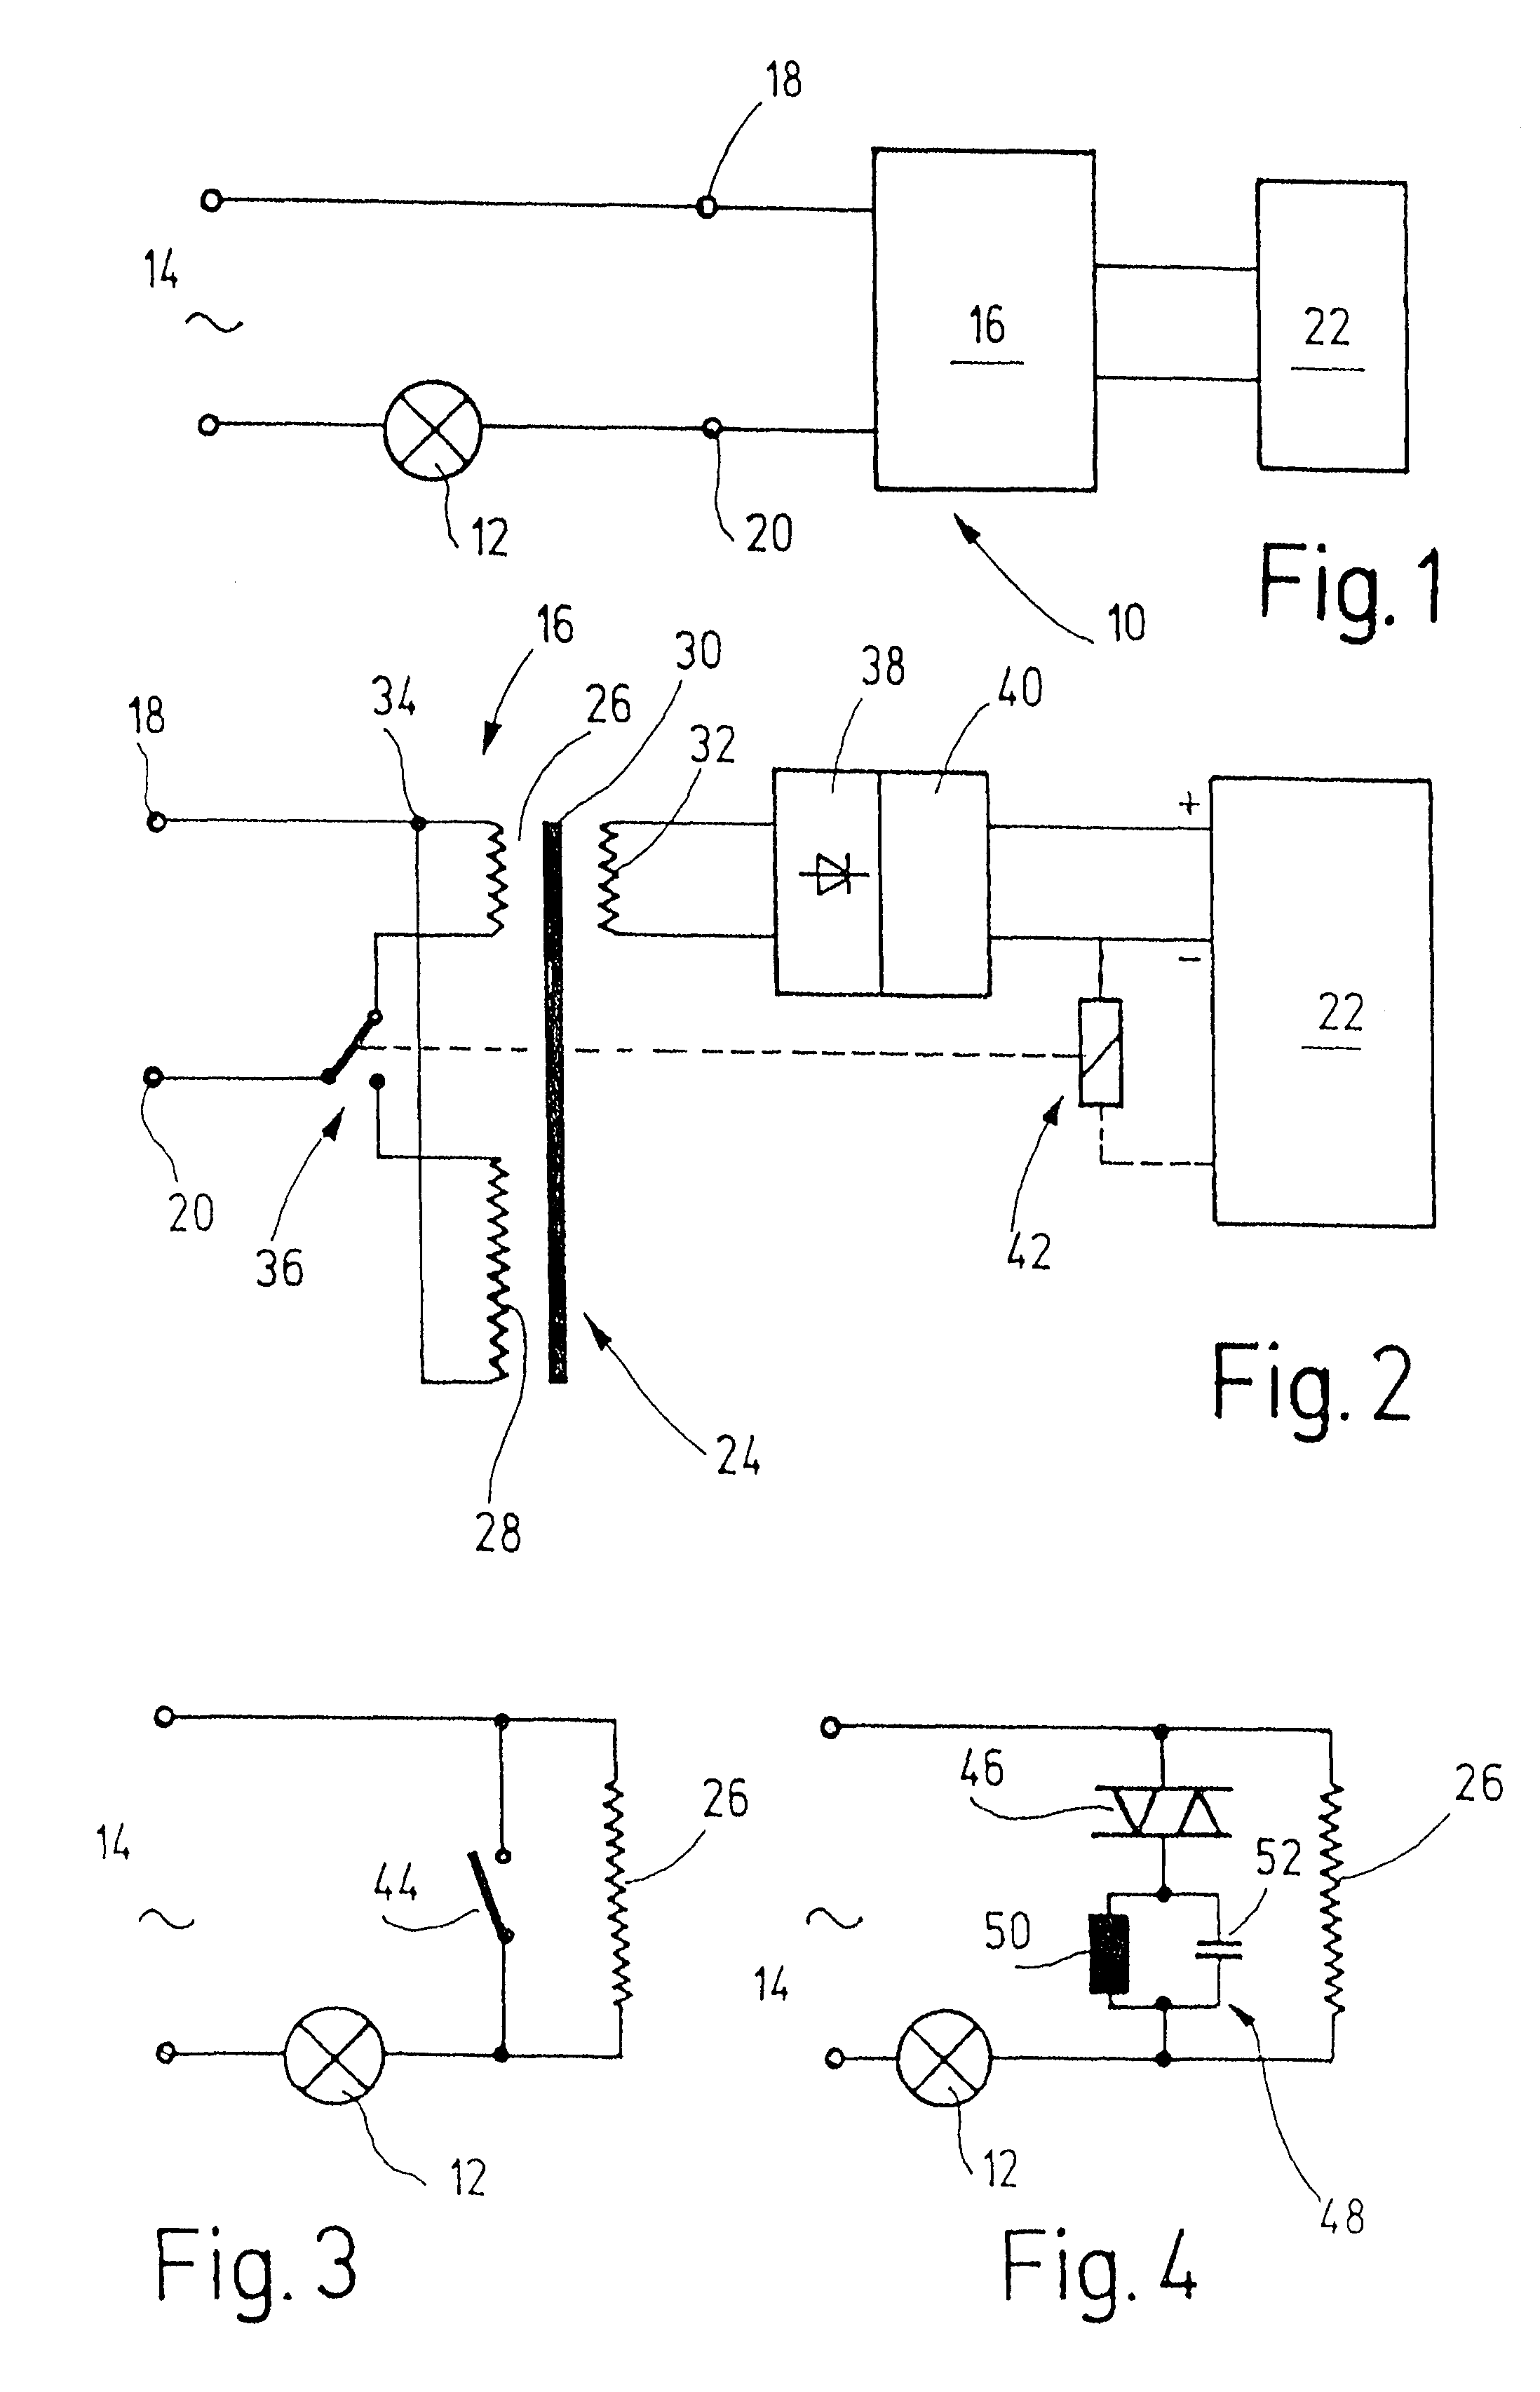 Circuit system for connecting an electrical consumer with an alternating-voltage source